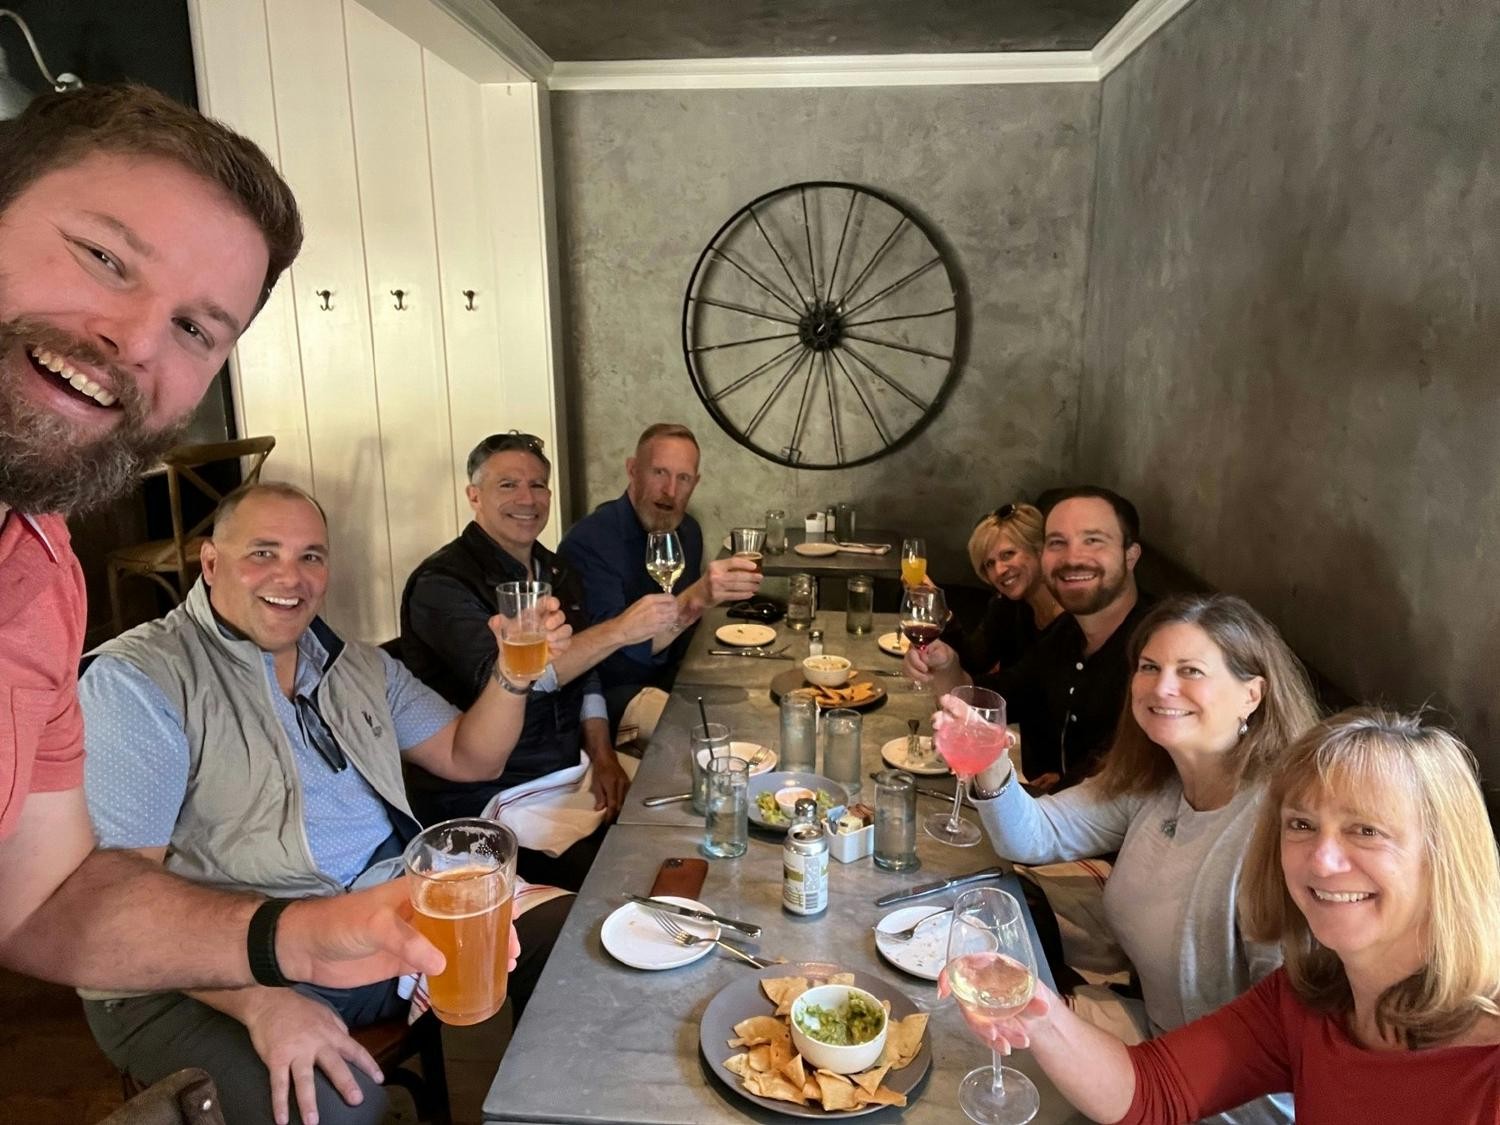 Baltimore Team - Cheers during Dinner